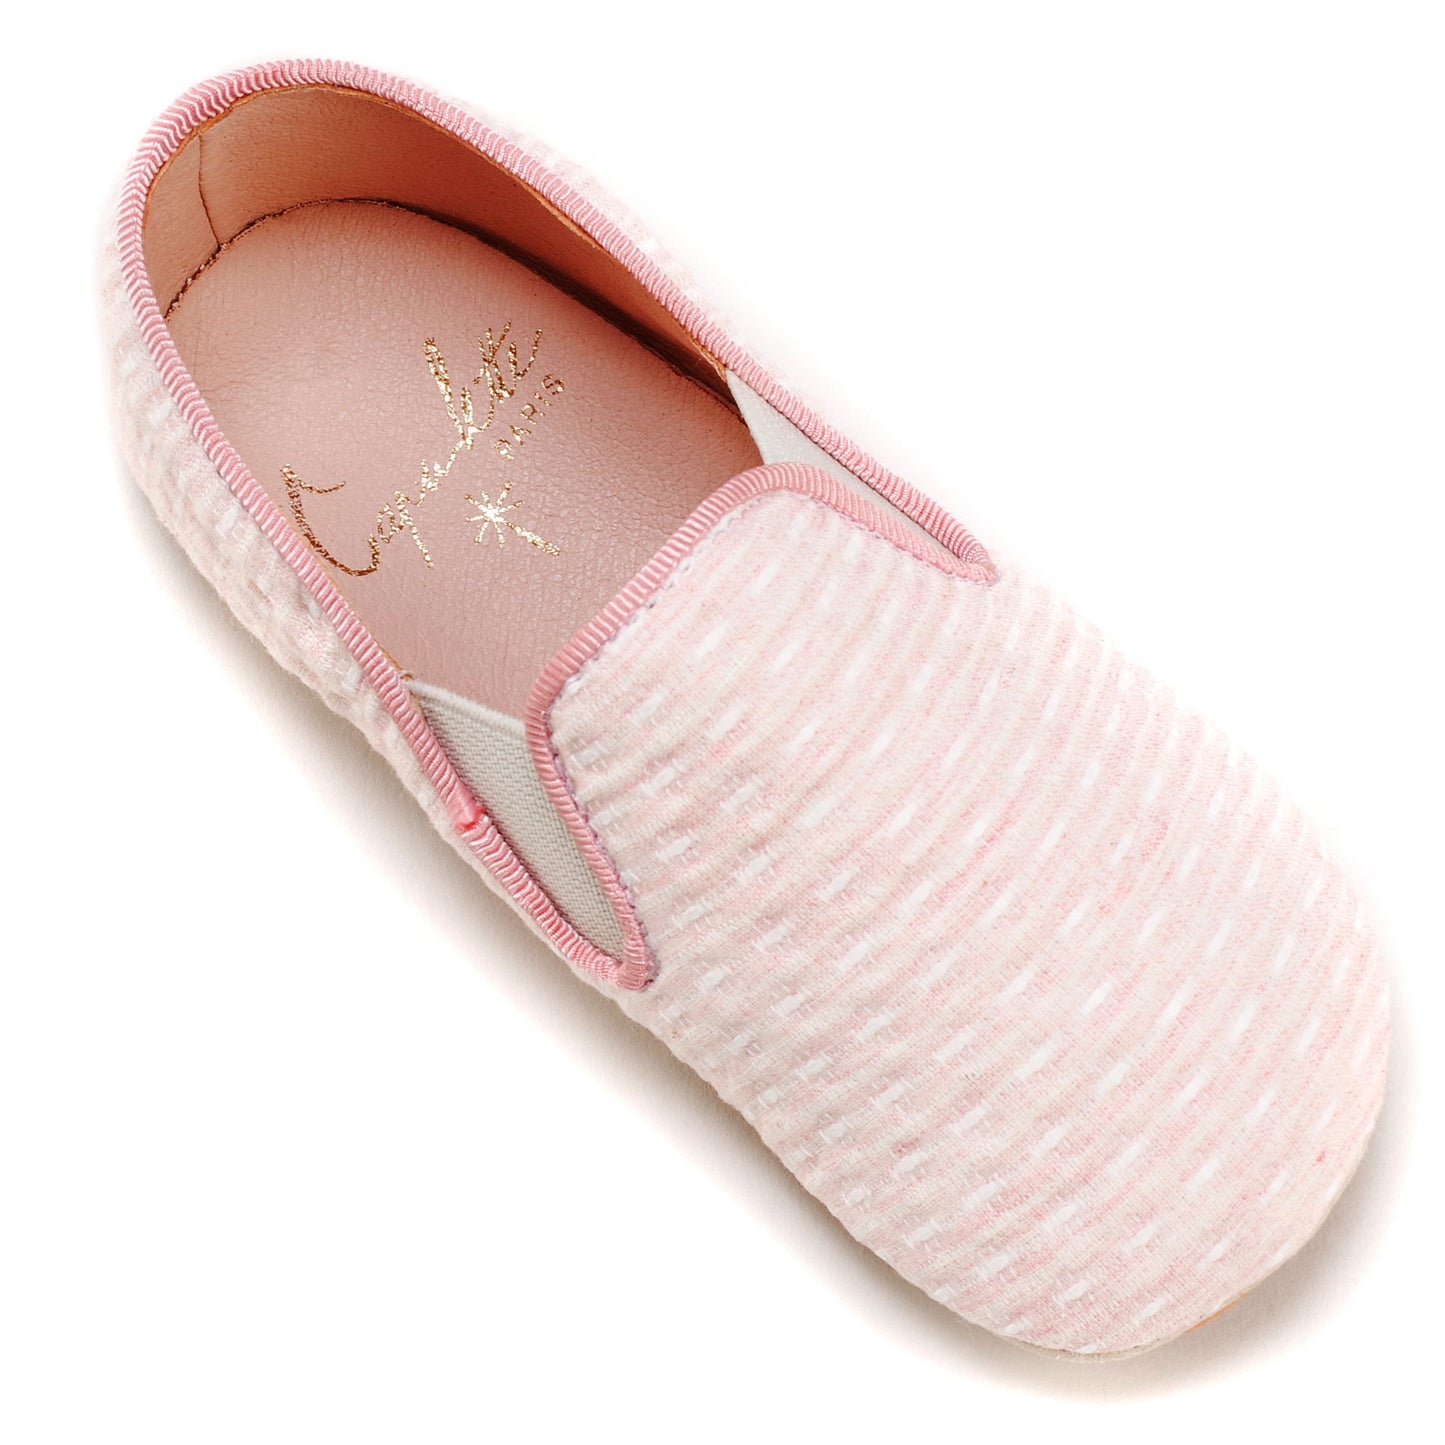 The Pale Pink Pull-On Slipper